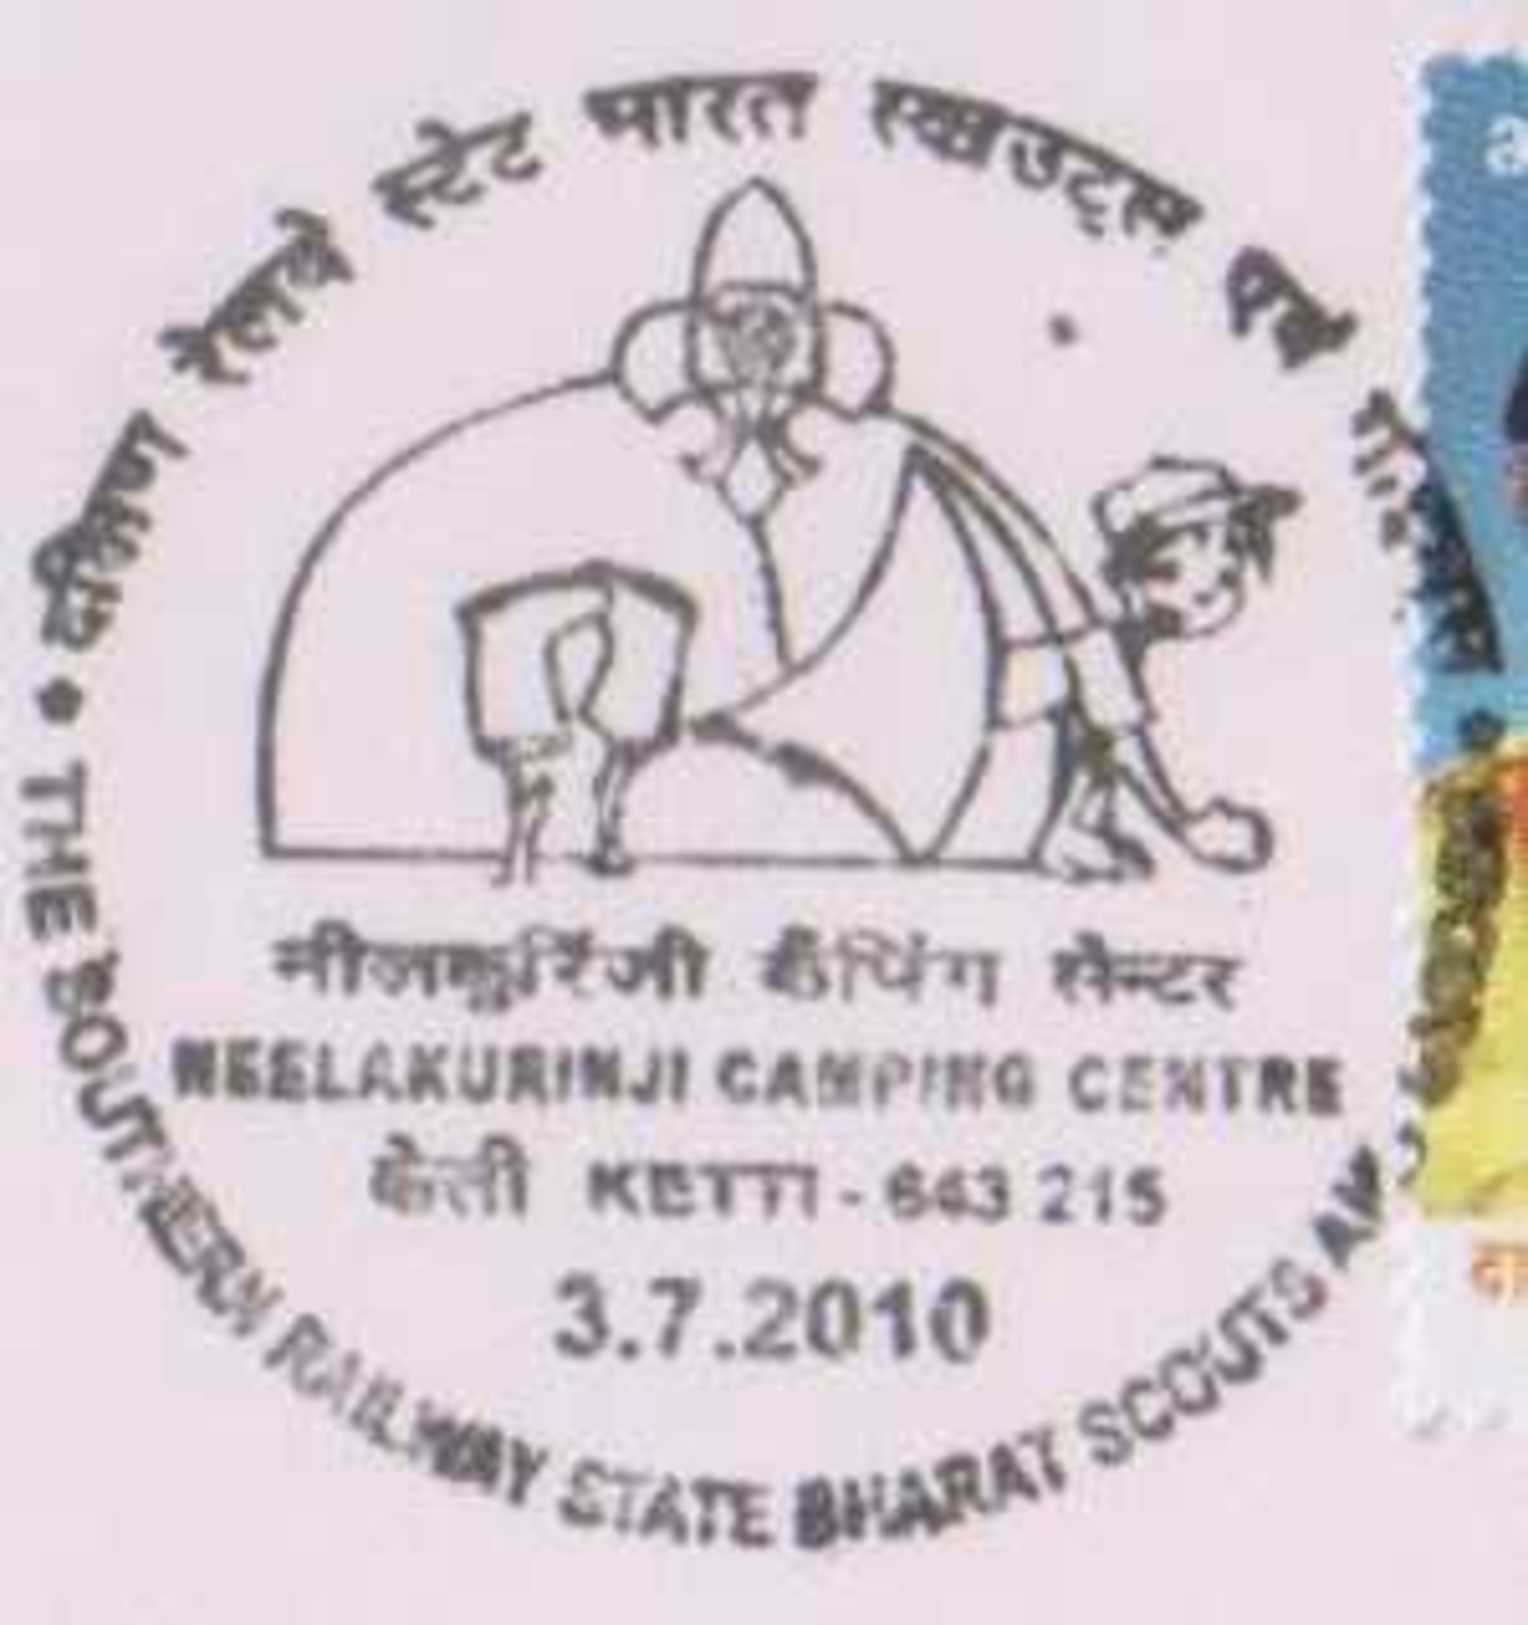 India 2010 Special Cover, Neelakurainji Camping Centre, Scouts & Guides, Southern Railway, Train Track, Red Ribbon, - Other & Unclassified